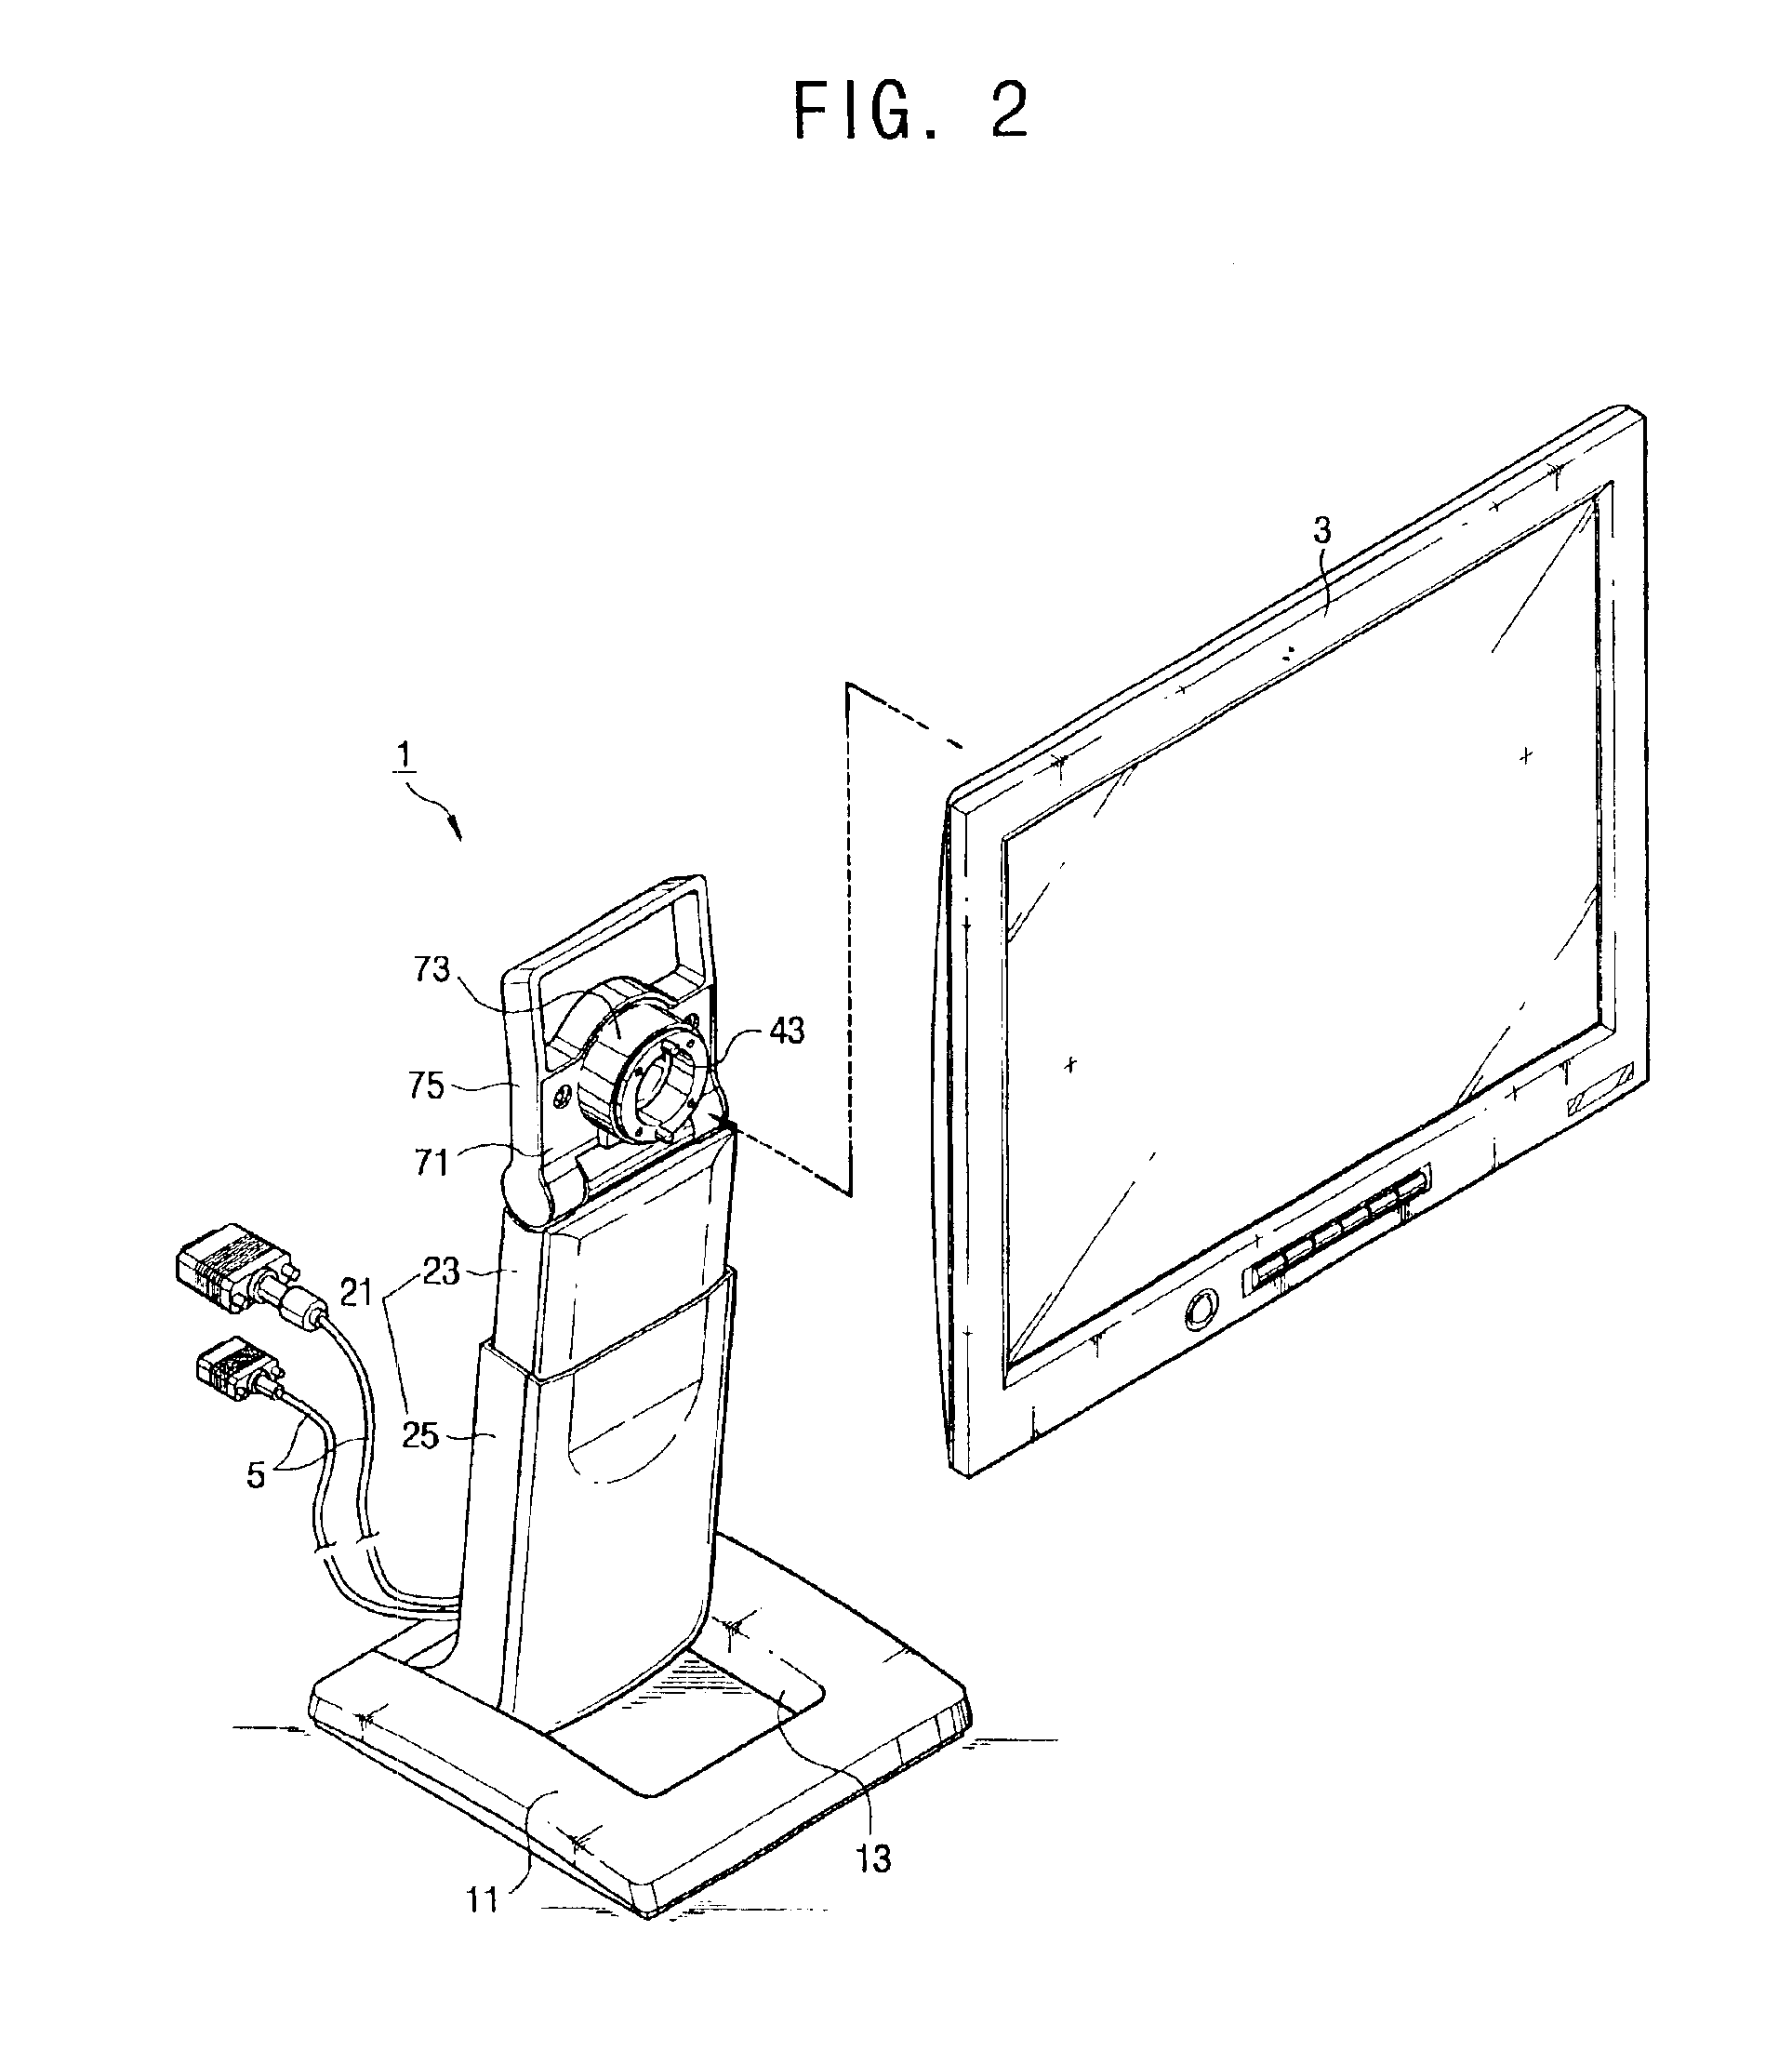 LCD monitor stand